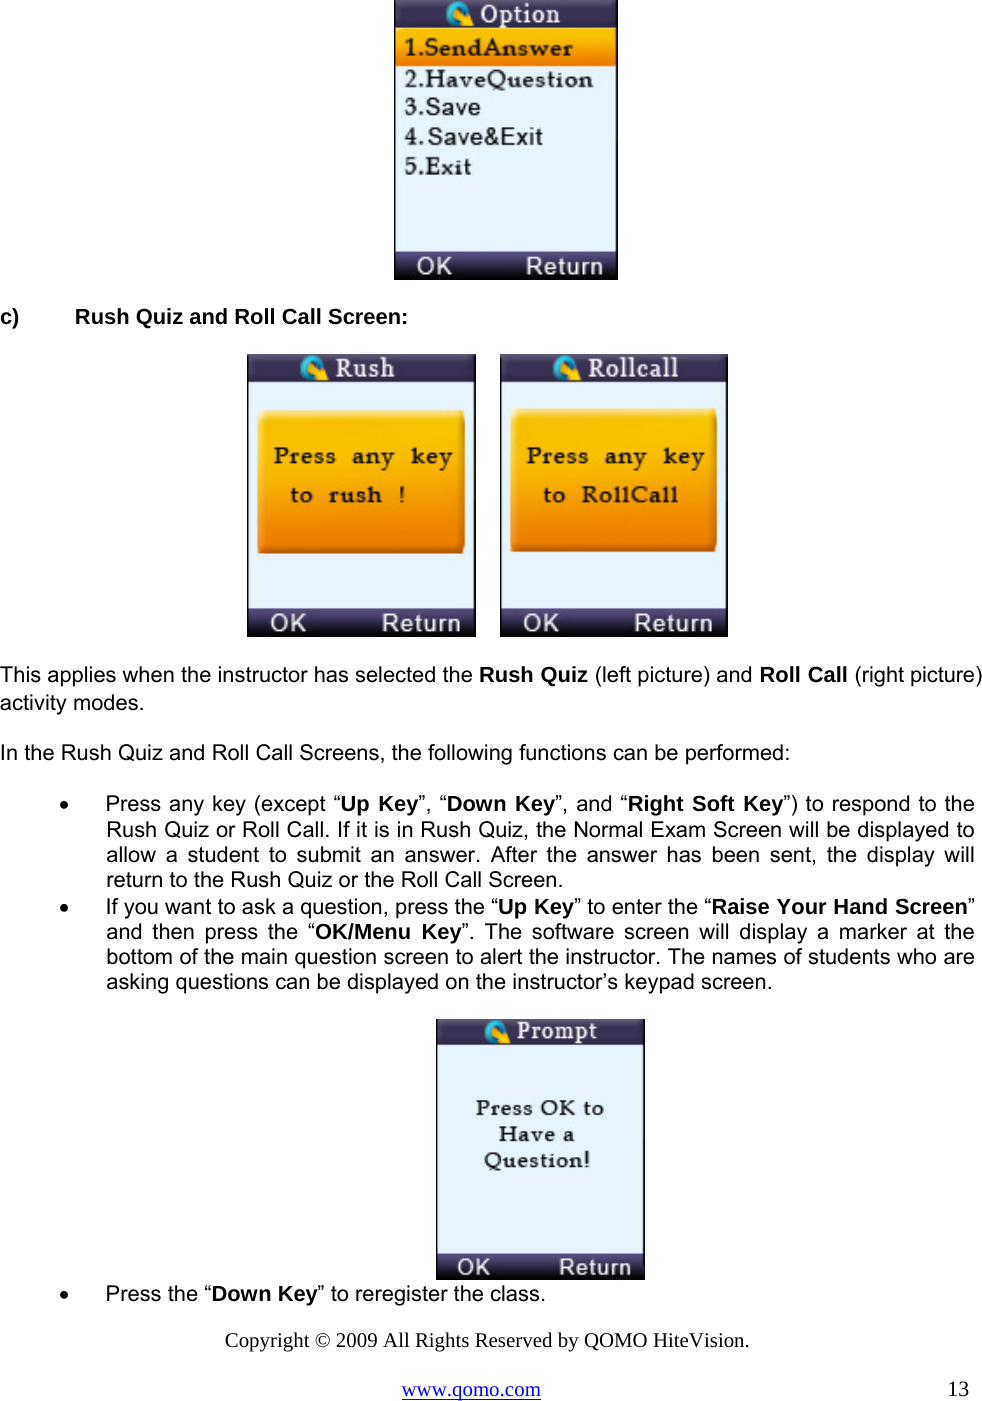 Copyright © 2009 All Rights Reserved by QOMO HiteVision. www.qomo.com                                                                          13   c)  Rush Quiz and Roll Call Screen:        This applies when the instructor has selected the Rush Quiz (left picture) and Roll Call (right picture) activity modes. In the Rush Quiz and Roll Call Screens, the following functions can be performed: •      Press any key (except “Up Key”, “Down Key”, and “Right Soft Key”) to respond to the Rush Quiz or Roll Call. If it is in Rush Quiz, the Normal Exam Screen will be displayed to allow a student to submit an answer. After the answer has been sent, the display will return to the Rush Quiz or the Roll Call Screen. •      If you want to ask a question, press the “Up Key” to enter the “Raise Your Hand Screen” and then press the “OK/Menu Key”. The software screen will display a marker at the bottom of the main question screen to alert the instructor. The names of students who are asking questions can be displayed on the instructor’s keypad screen.       •      Press the “Down Key” to reregister the class. 